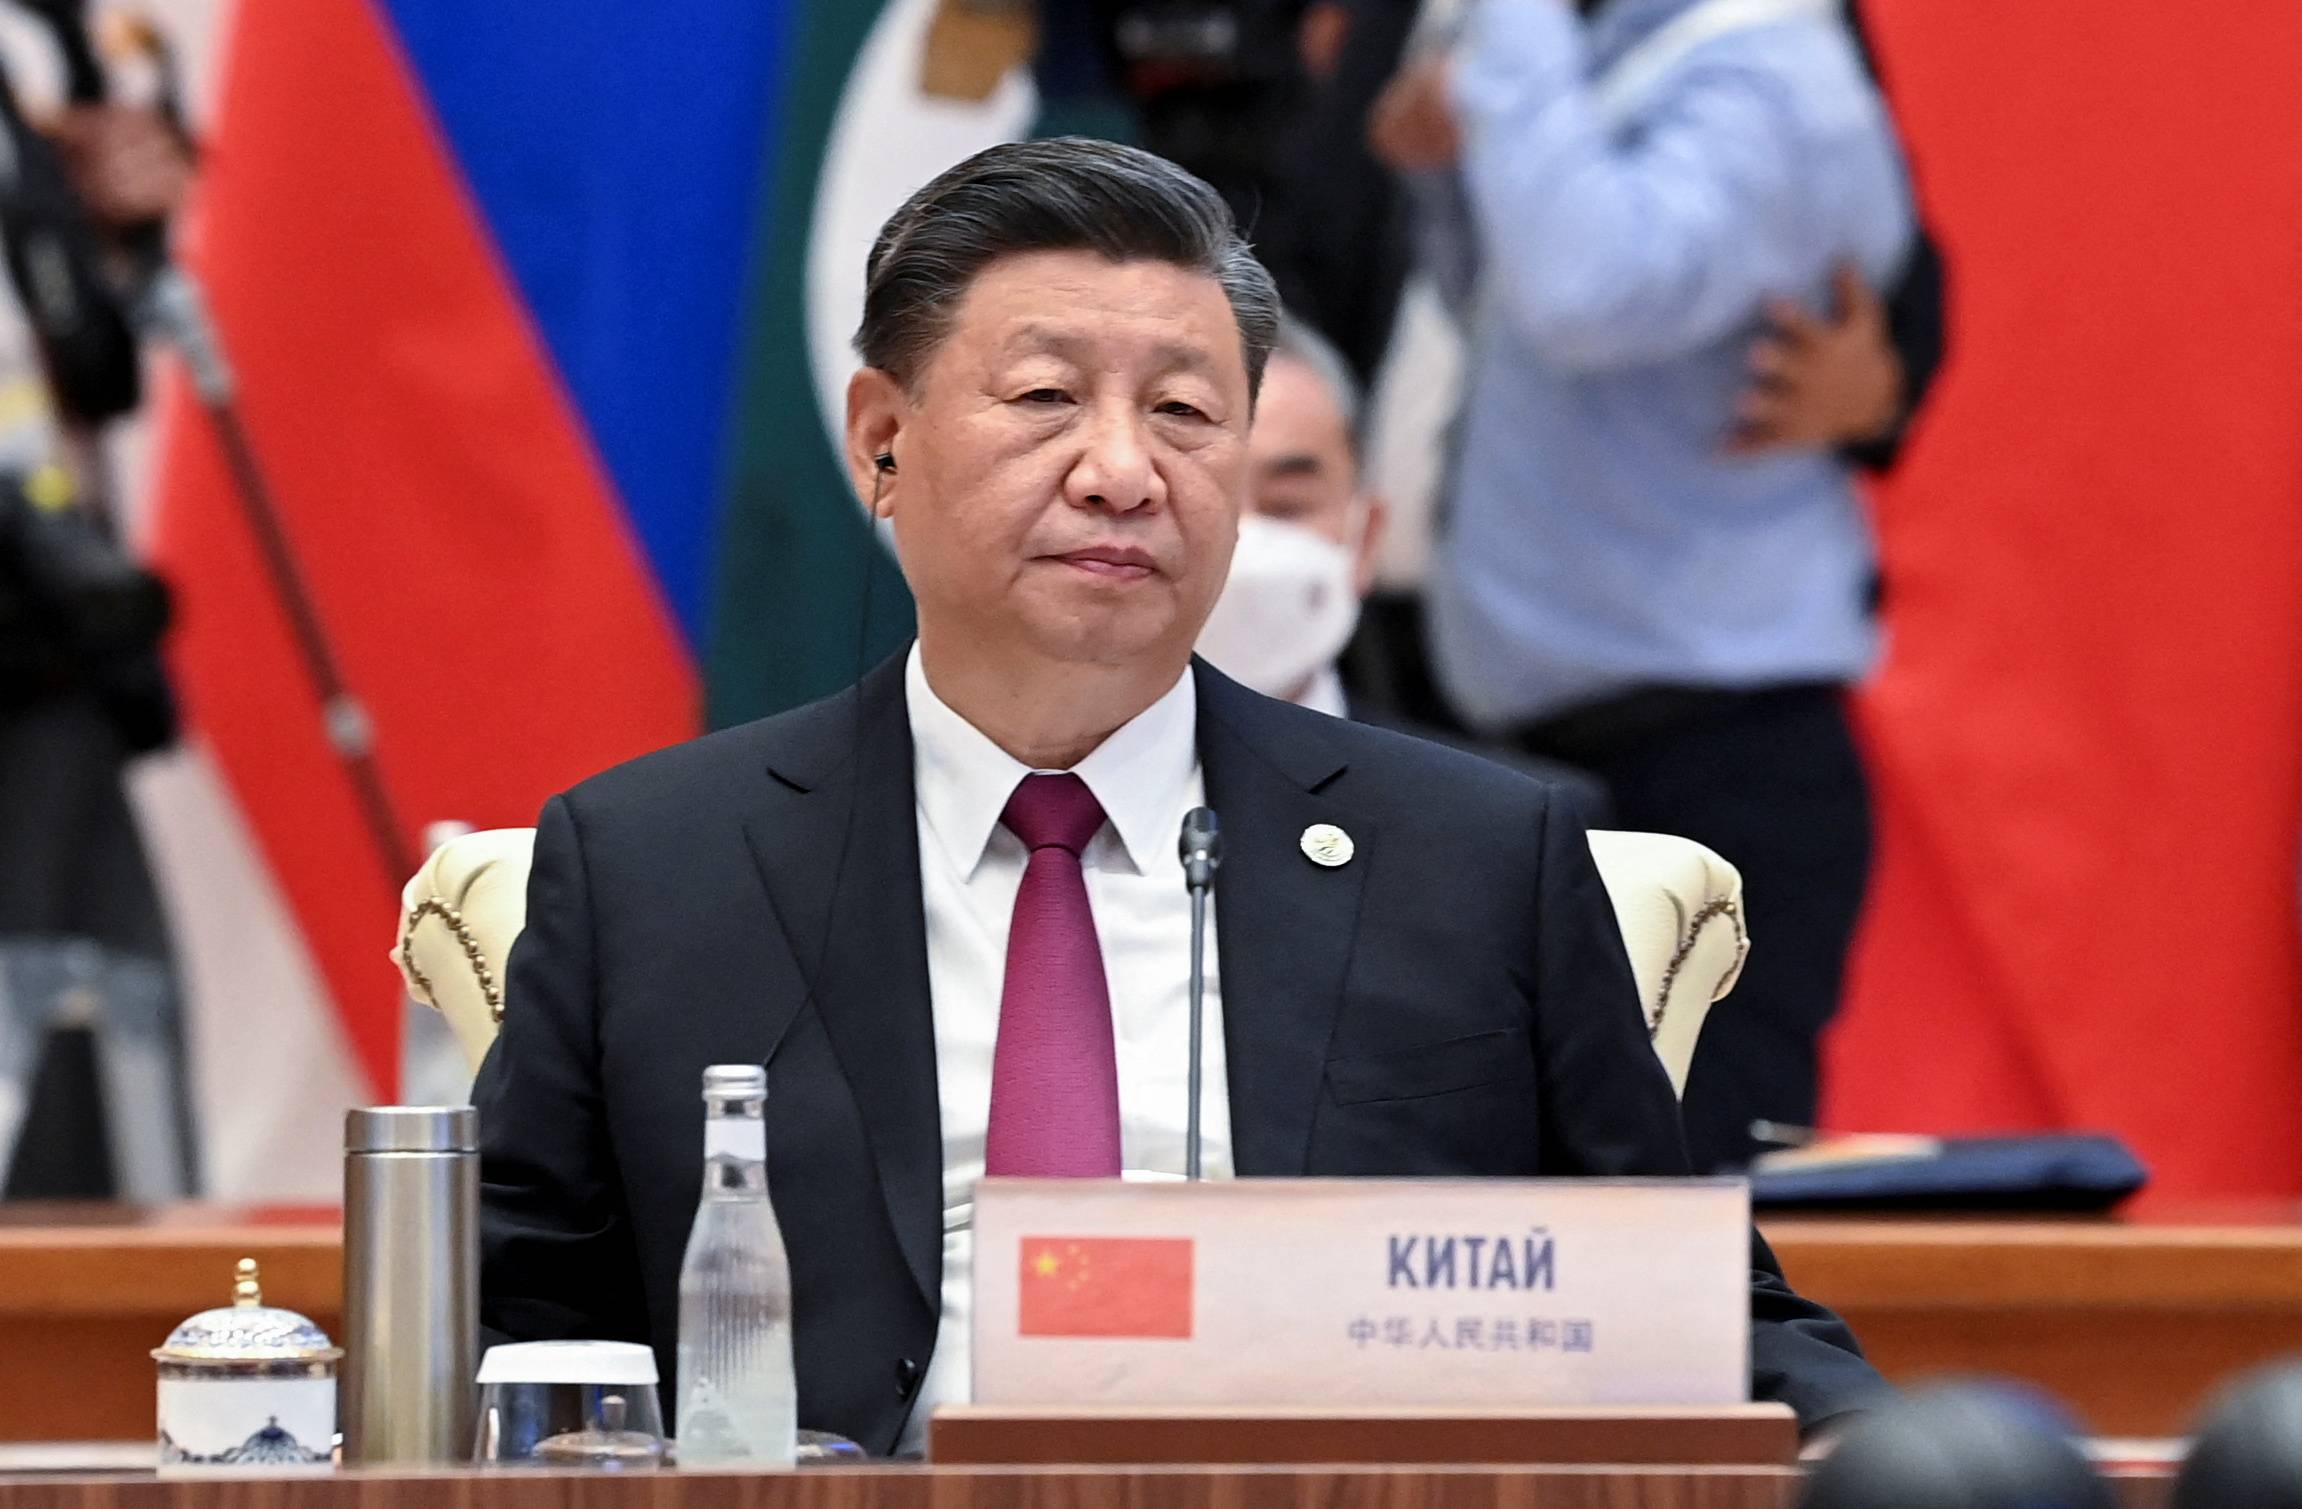 Chinese President Xi Jinping attends a meeting of the council of heads of Shanghai Cooperation Organization member states at a summit in Samarkand, Uzbekistan, on Sept. 16, 2022. | SULTAN DOSALIEV / KYRGYZ PRESIDENTIAL PRESS SERVICE / VIA REUTERS